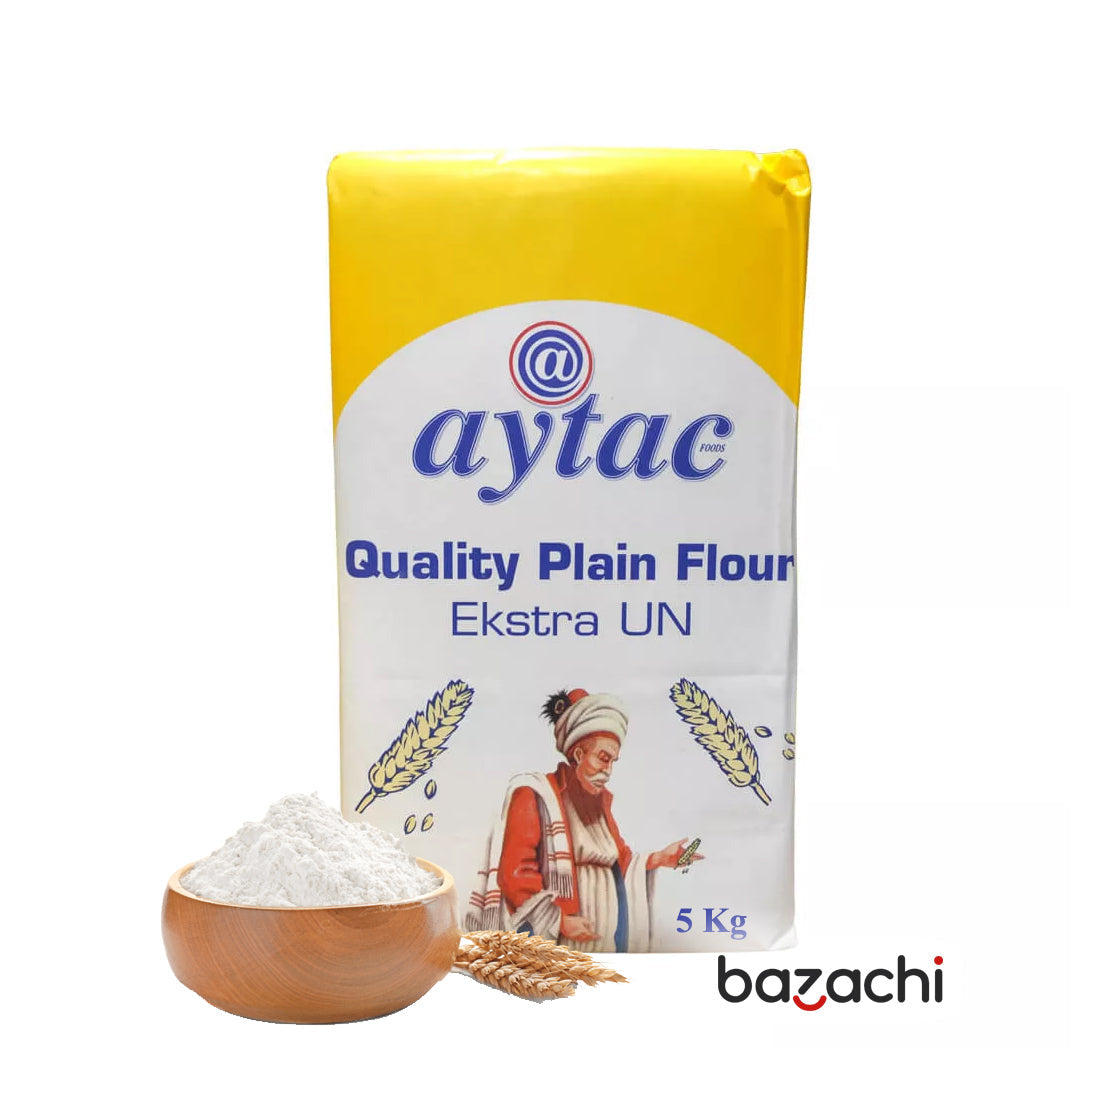 Aytac All Purpose Quality Plain Flour for Cooking & Baking 10 x 5Kg Pack